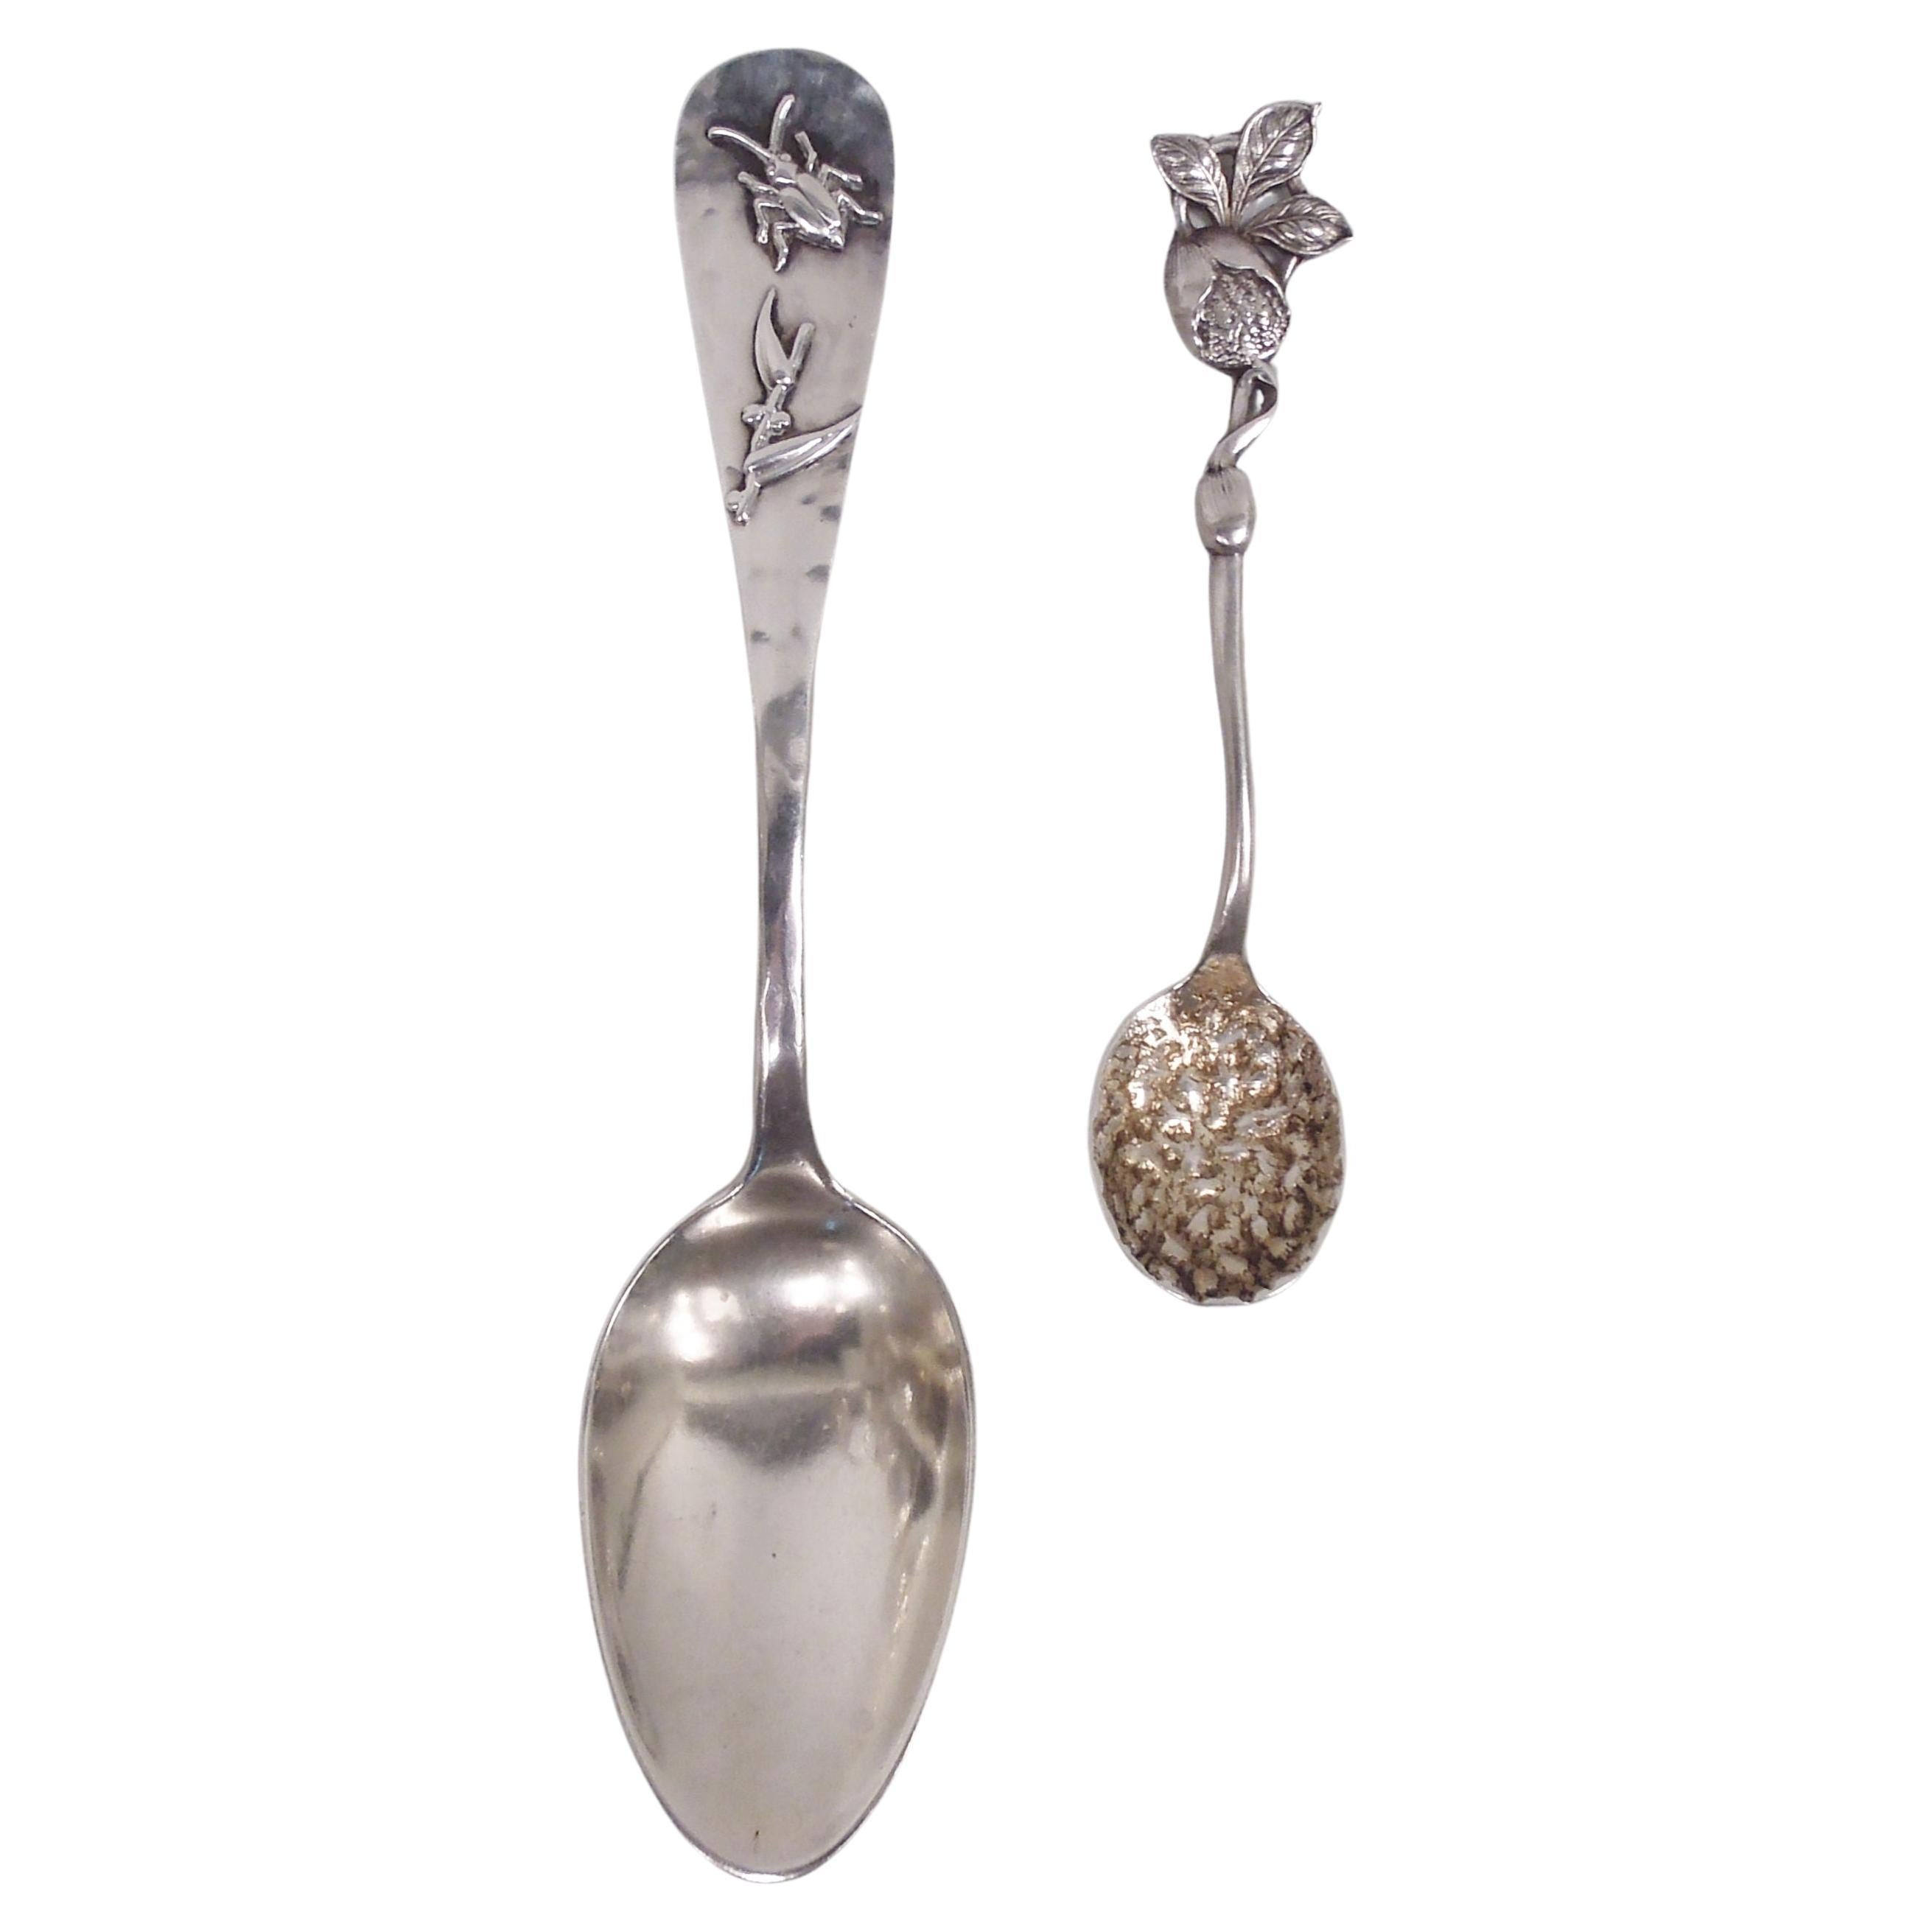 Two Antique Shiebler American Sterling Silver Novelty Spoons For Sale